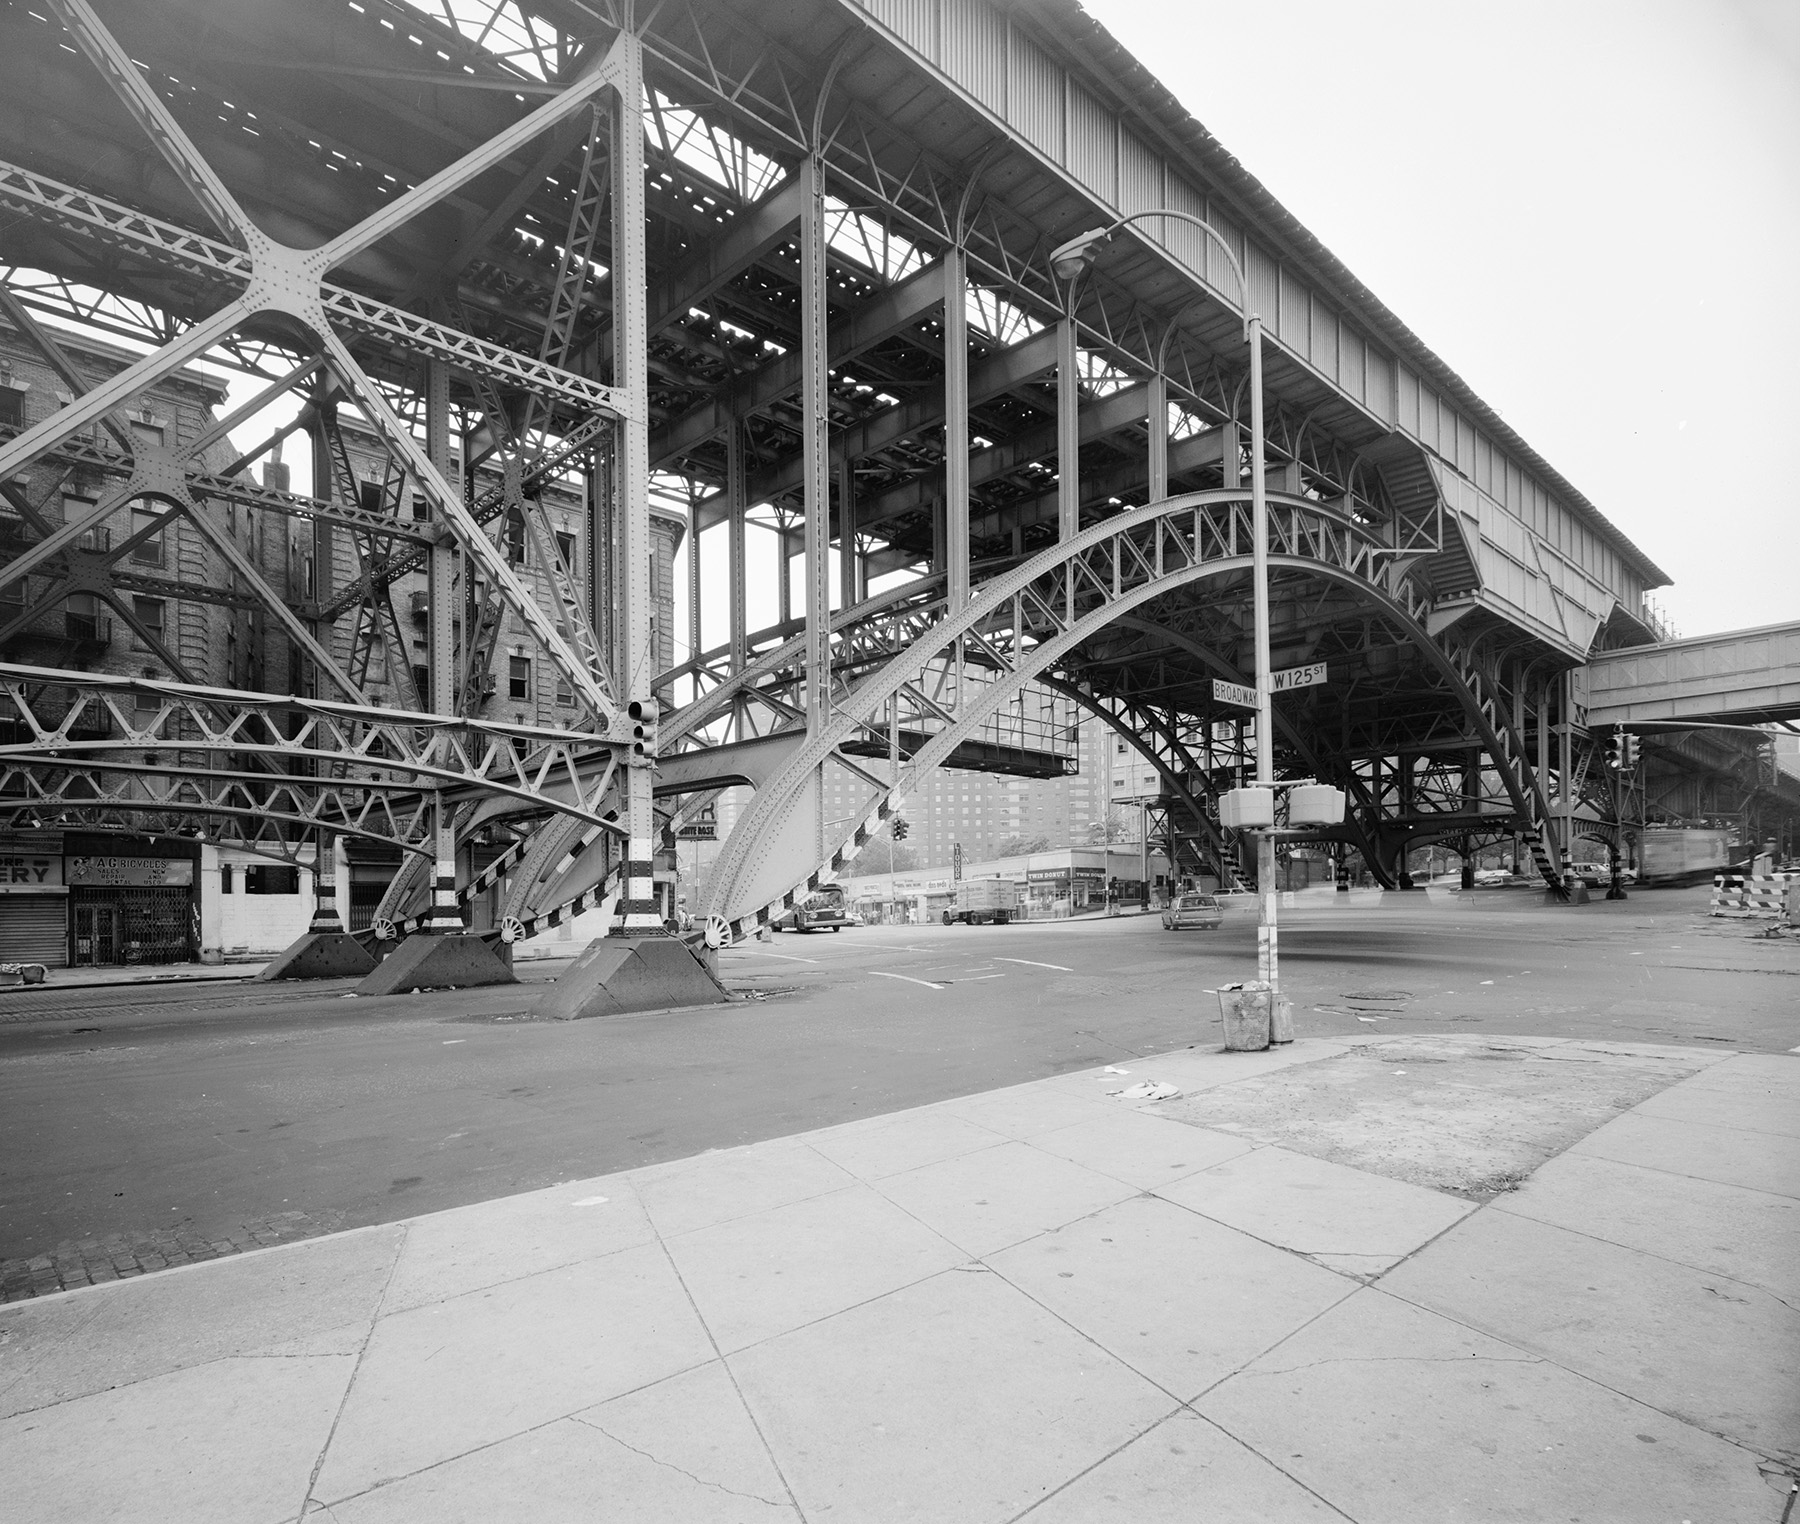 Photograph shows the central steel arch span arcing above the street. 